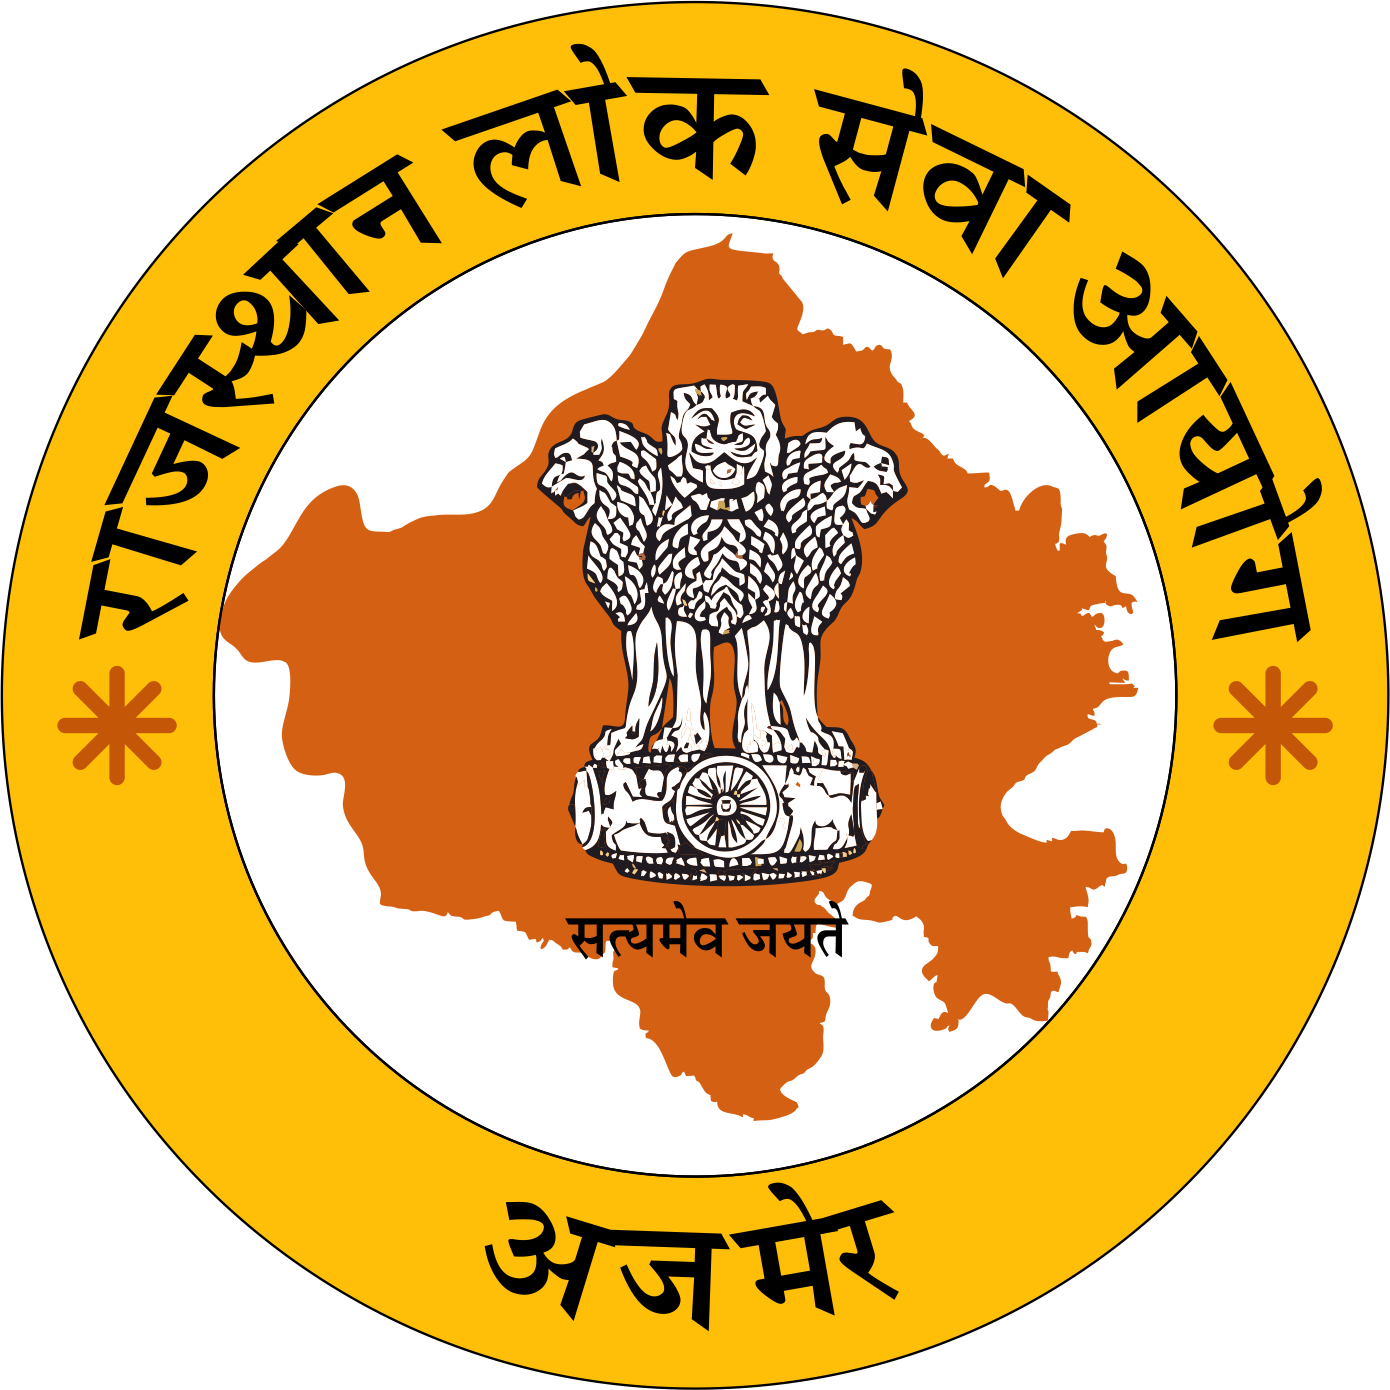 RPSC RAS Mains Admit Card 2016 to be Released soon for Download at rpsc.rajasthan.gov.in